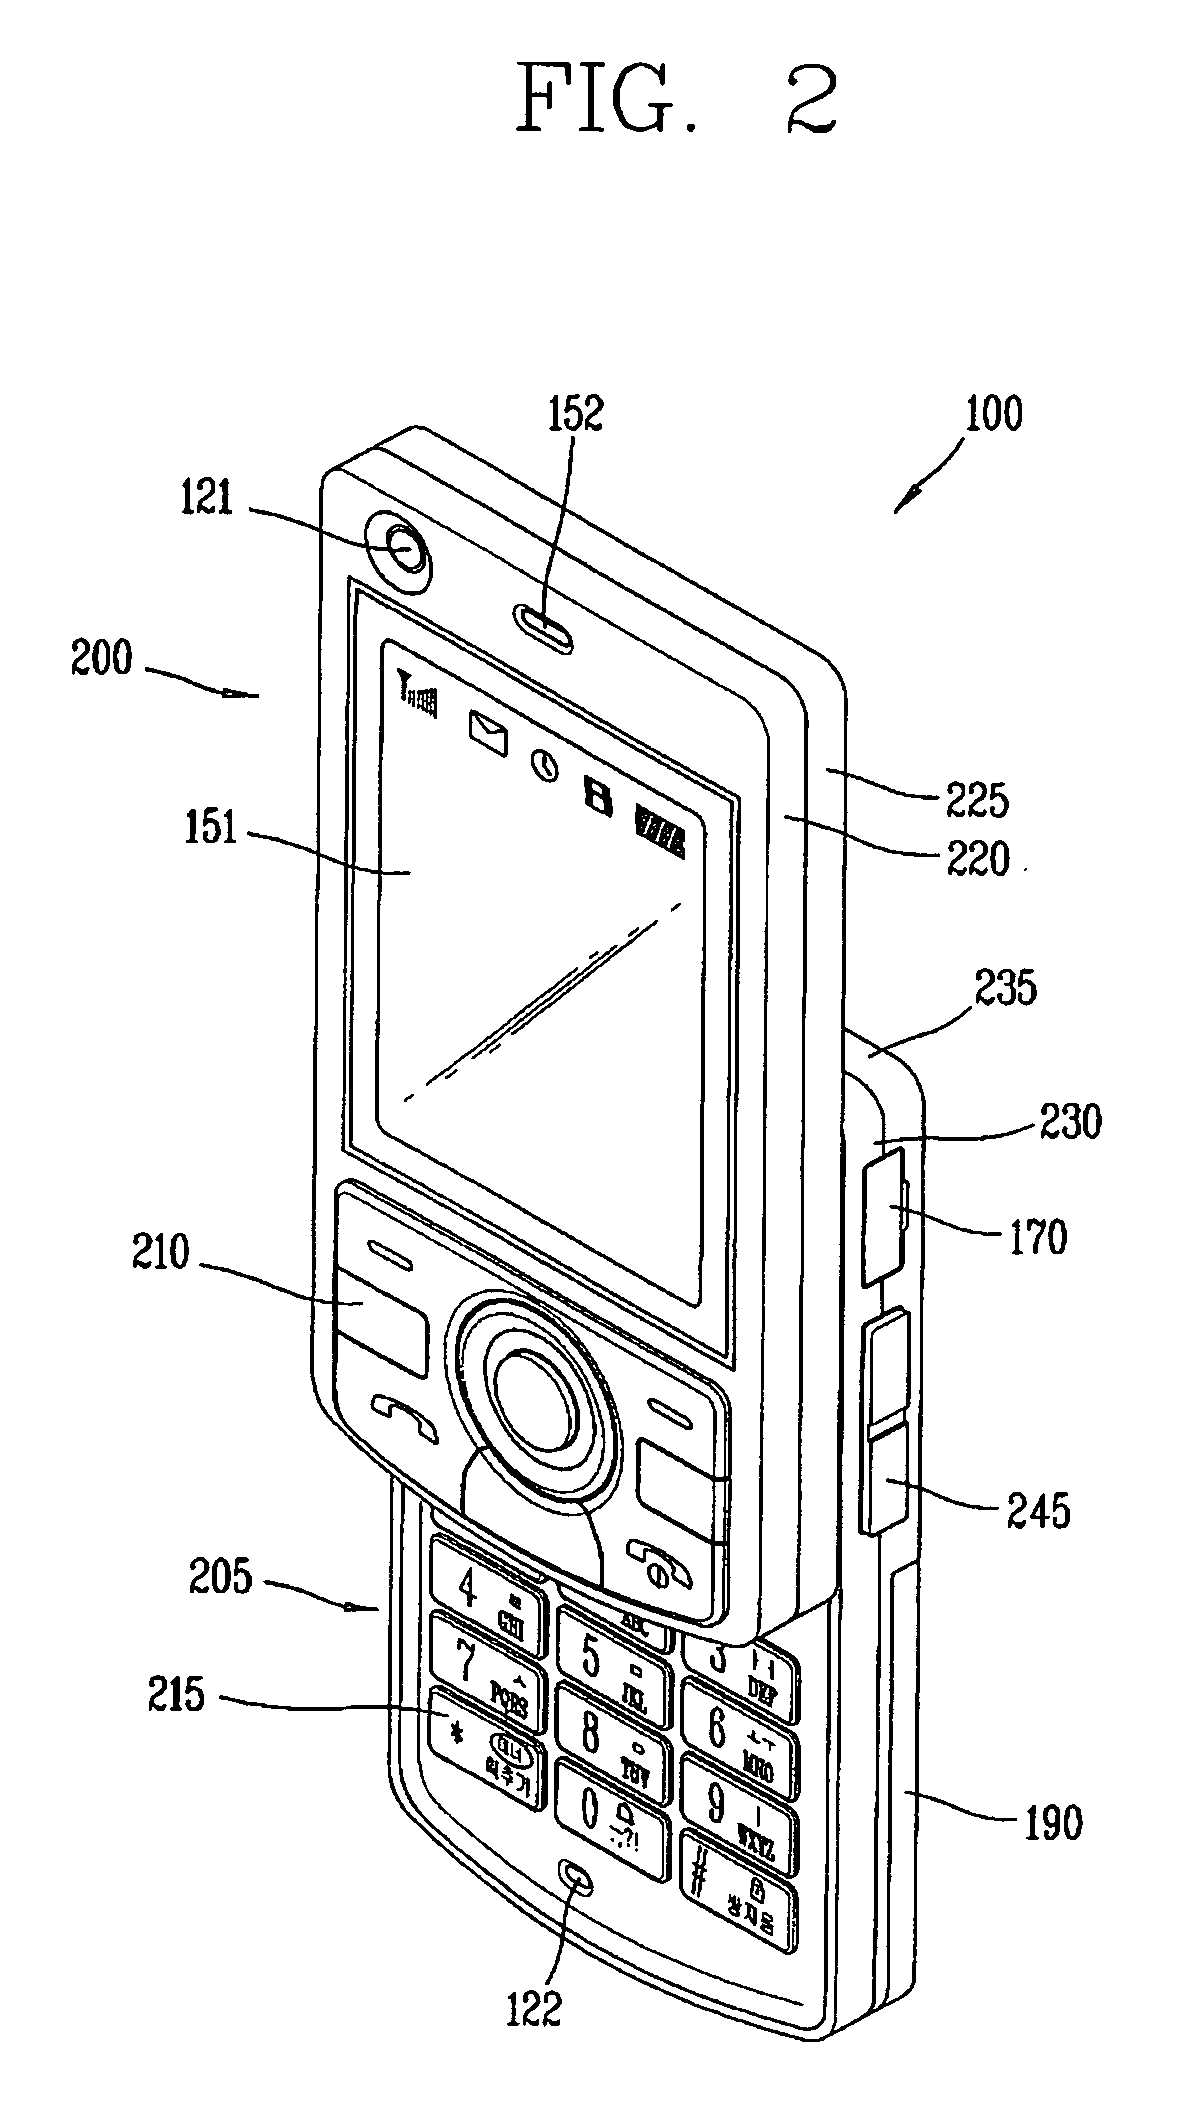 Non-contact charging apparatus having charging information display function and method thereof